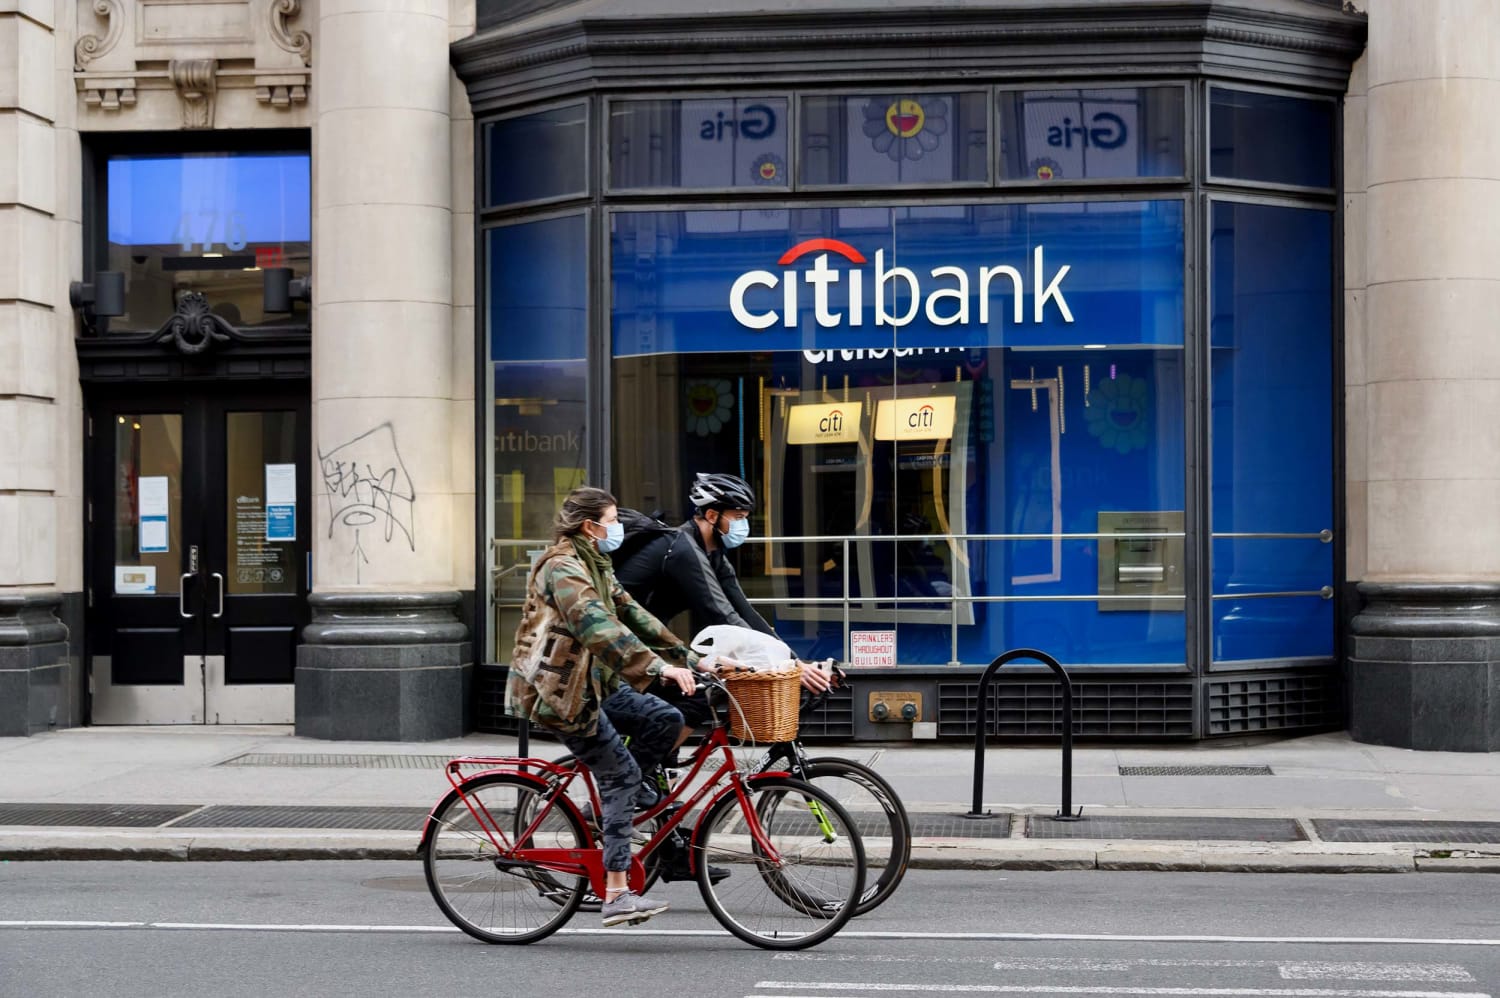 Citigroup CEO: covering employee travel costs for abortions not statement  on 'sensitive issue